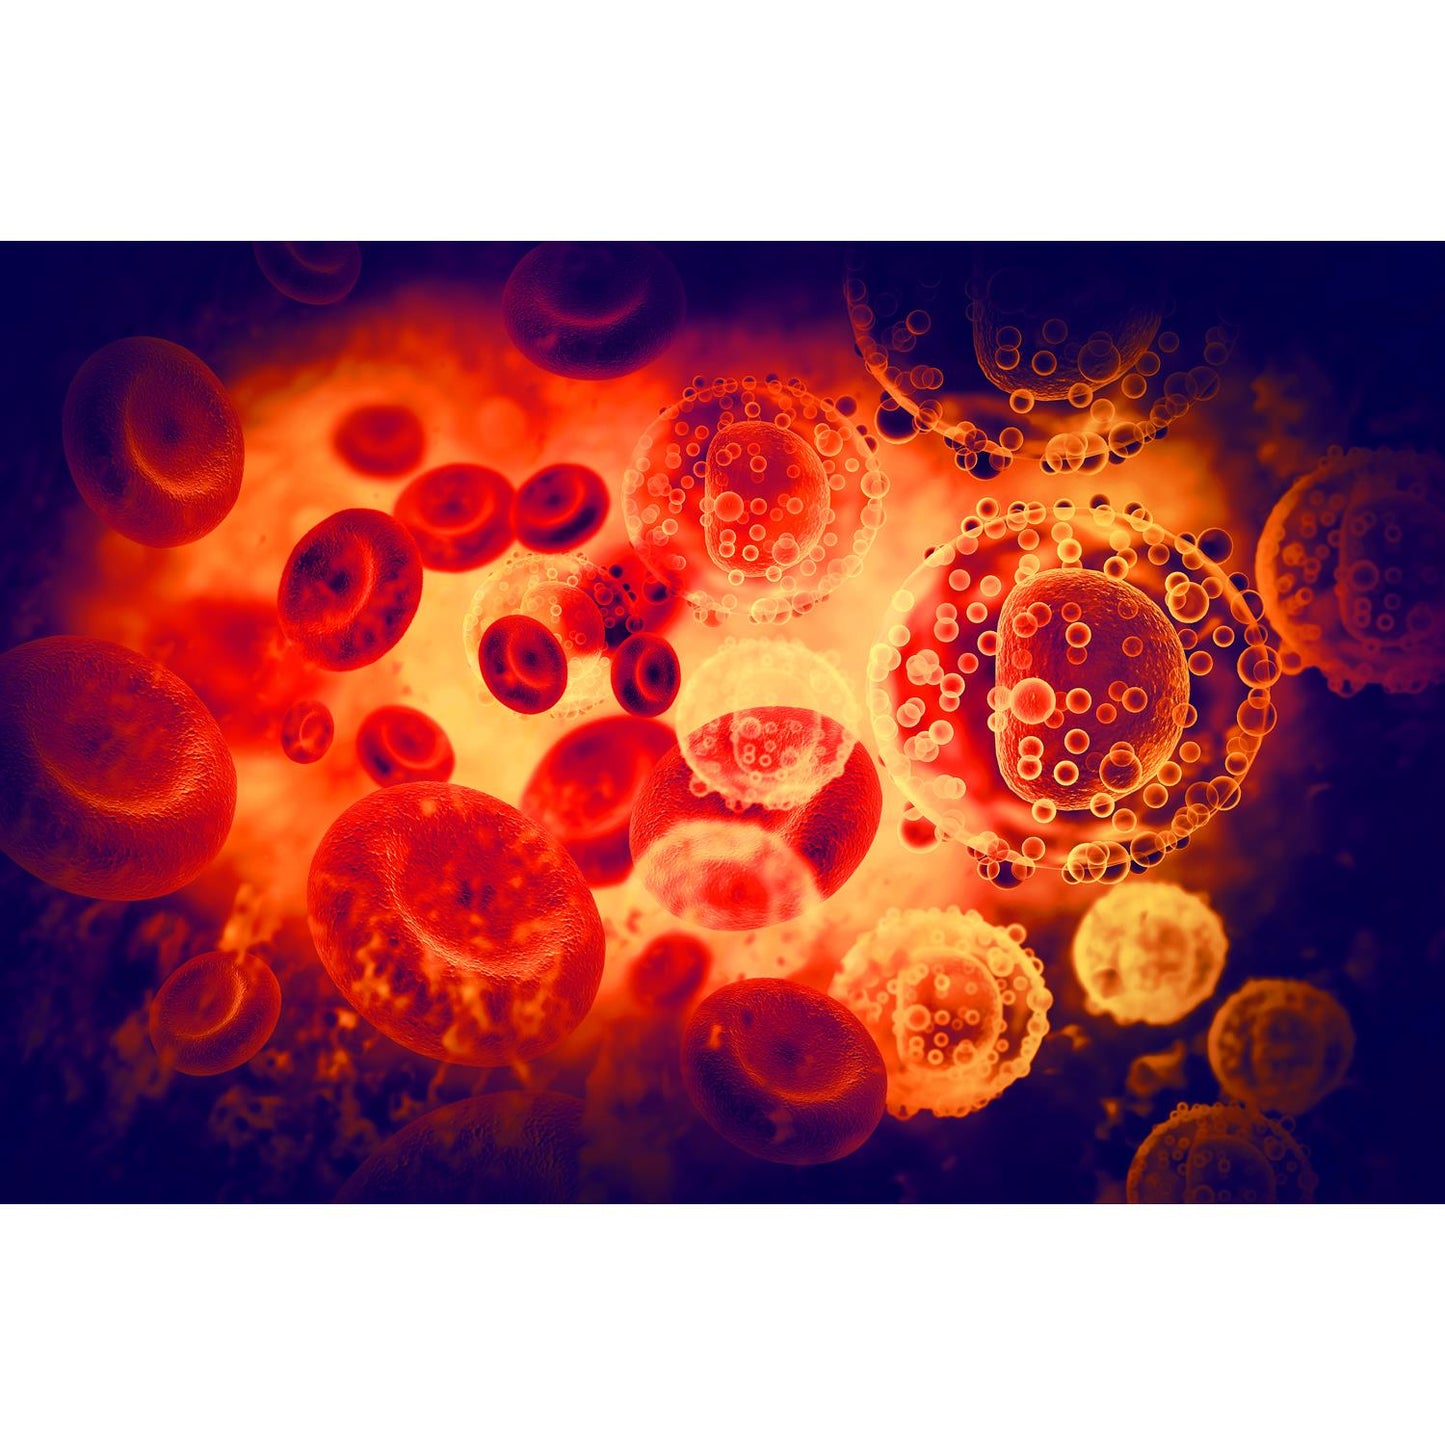 Medical Office Art - Infected blood cells